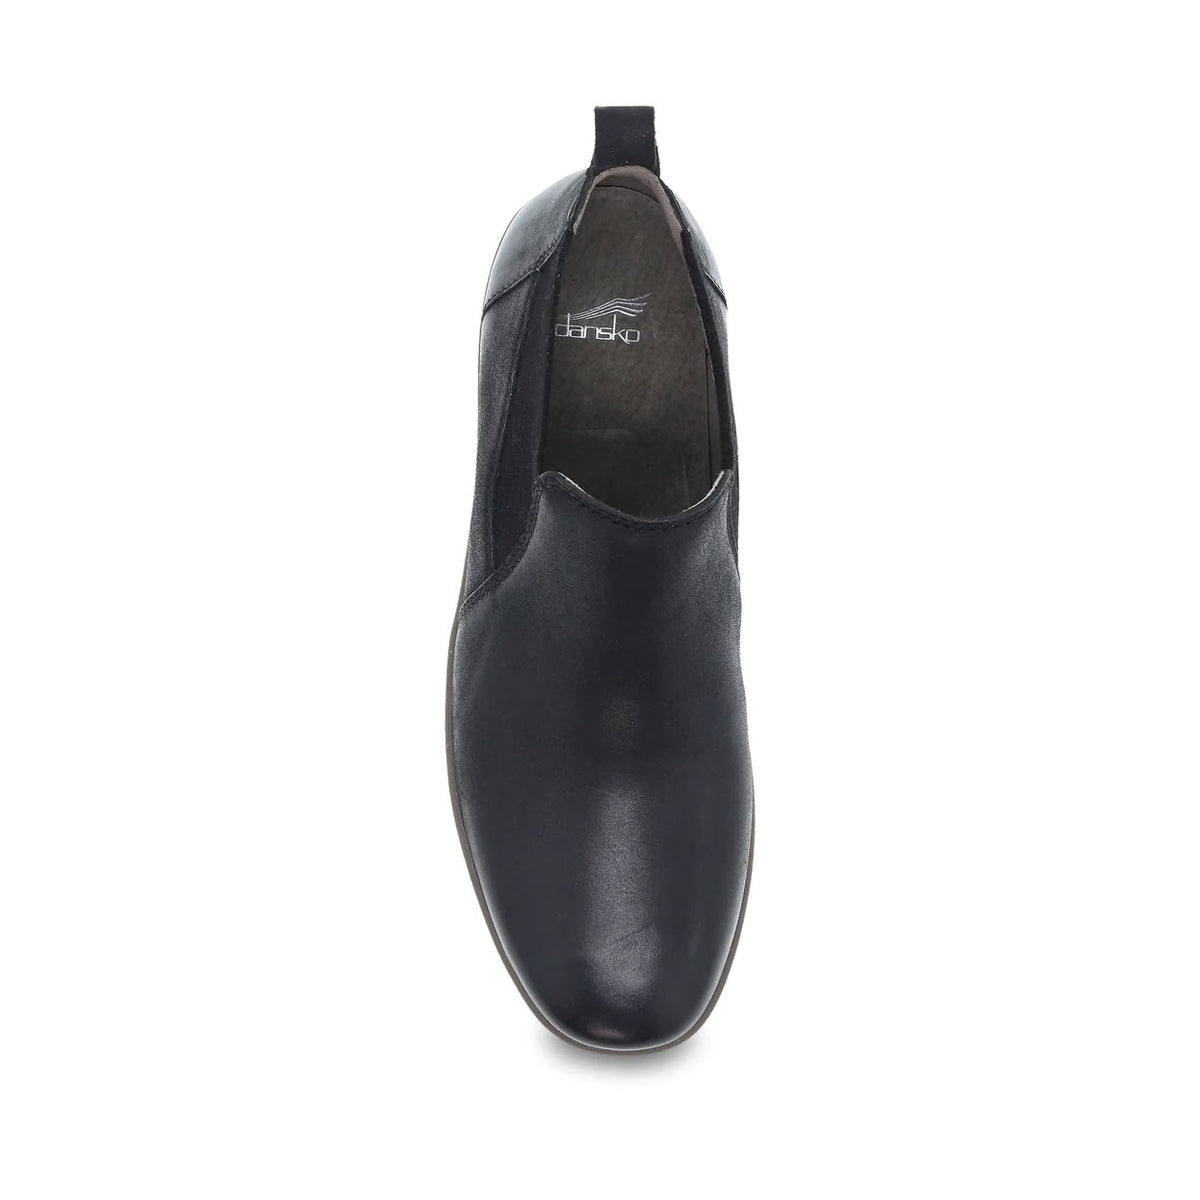 Black leather Chelsea boot featuring Dansko&#39;s Natural Arch technology, displayed on a white background with a top view that highlights its rounded toe and elastic side panel.